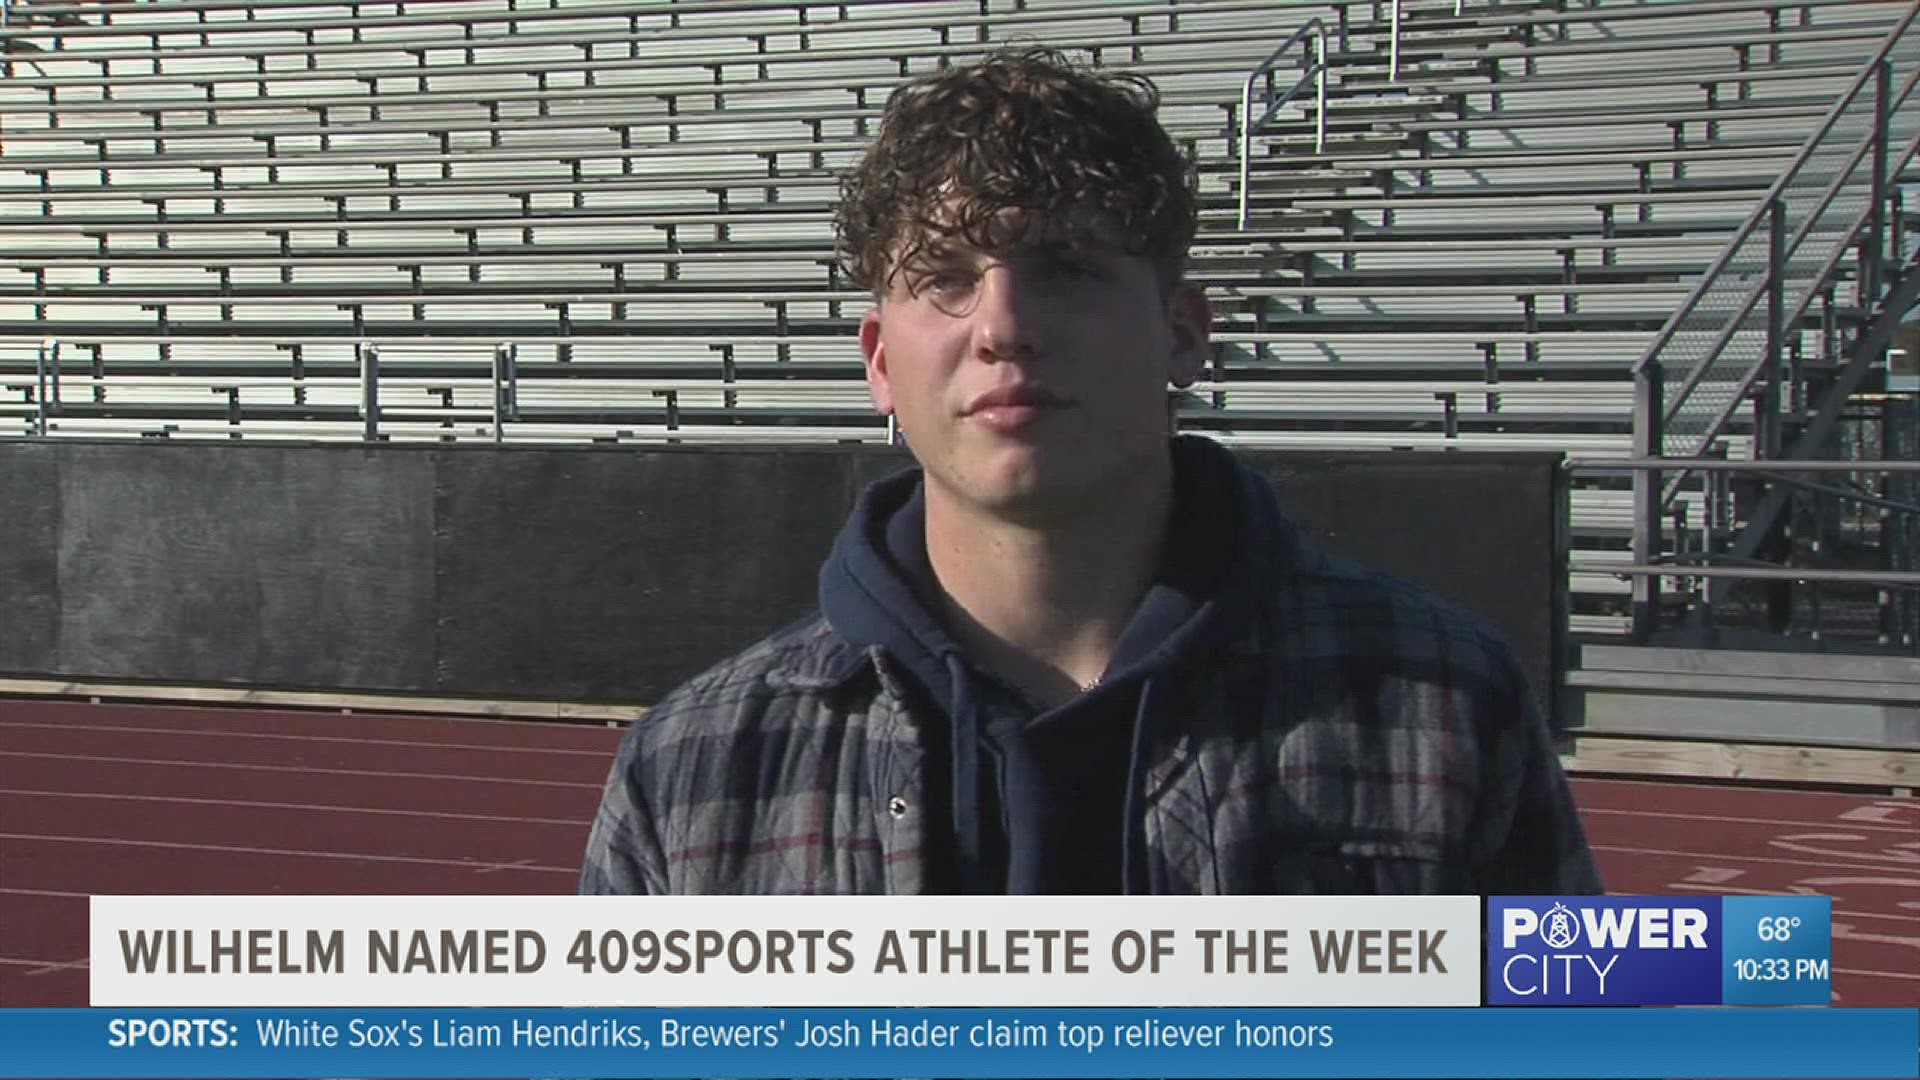 Wilhelm's team first attitude has earned him 409Sports Athlete of The Week honors